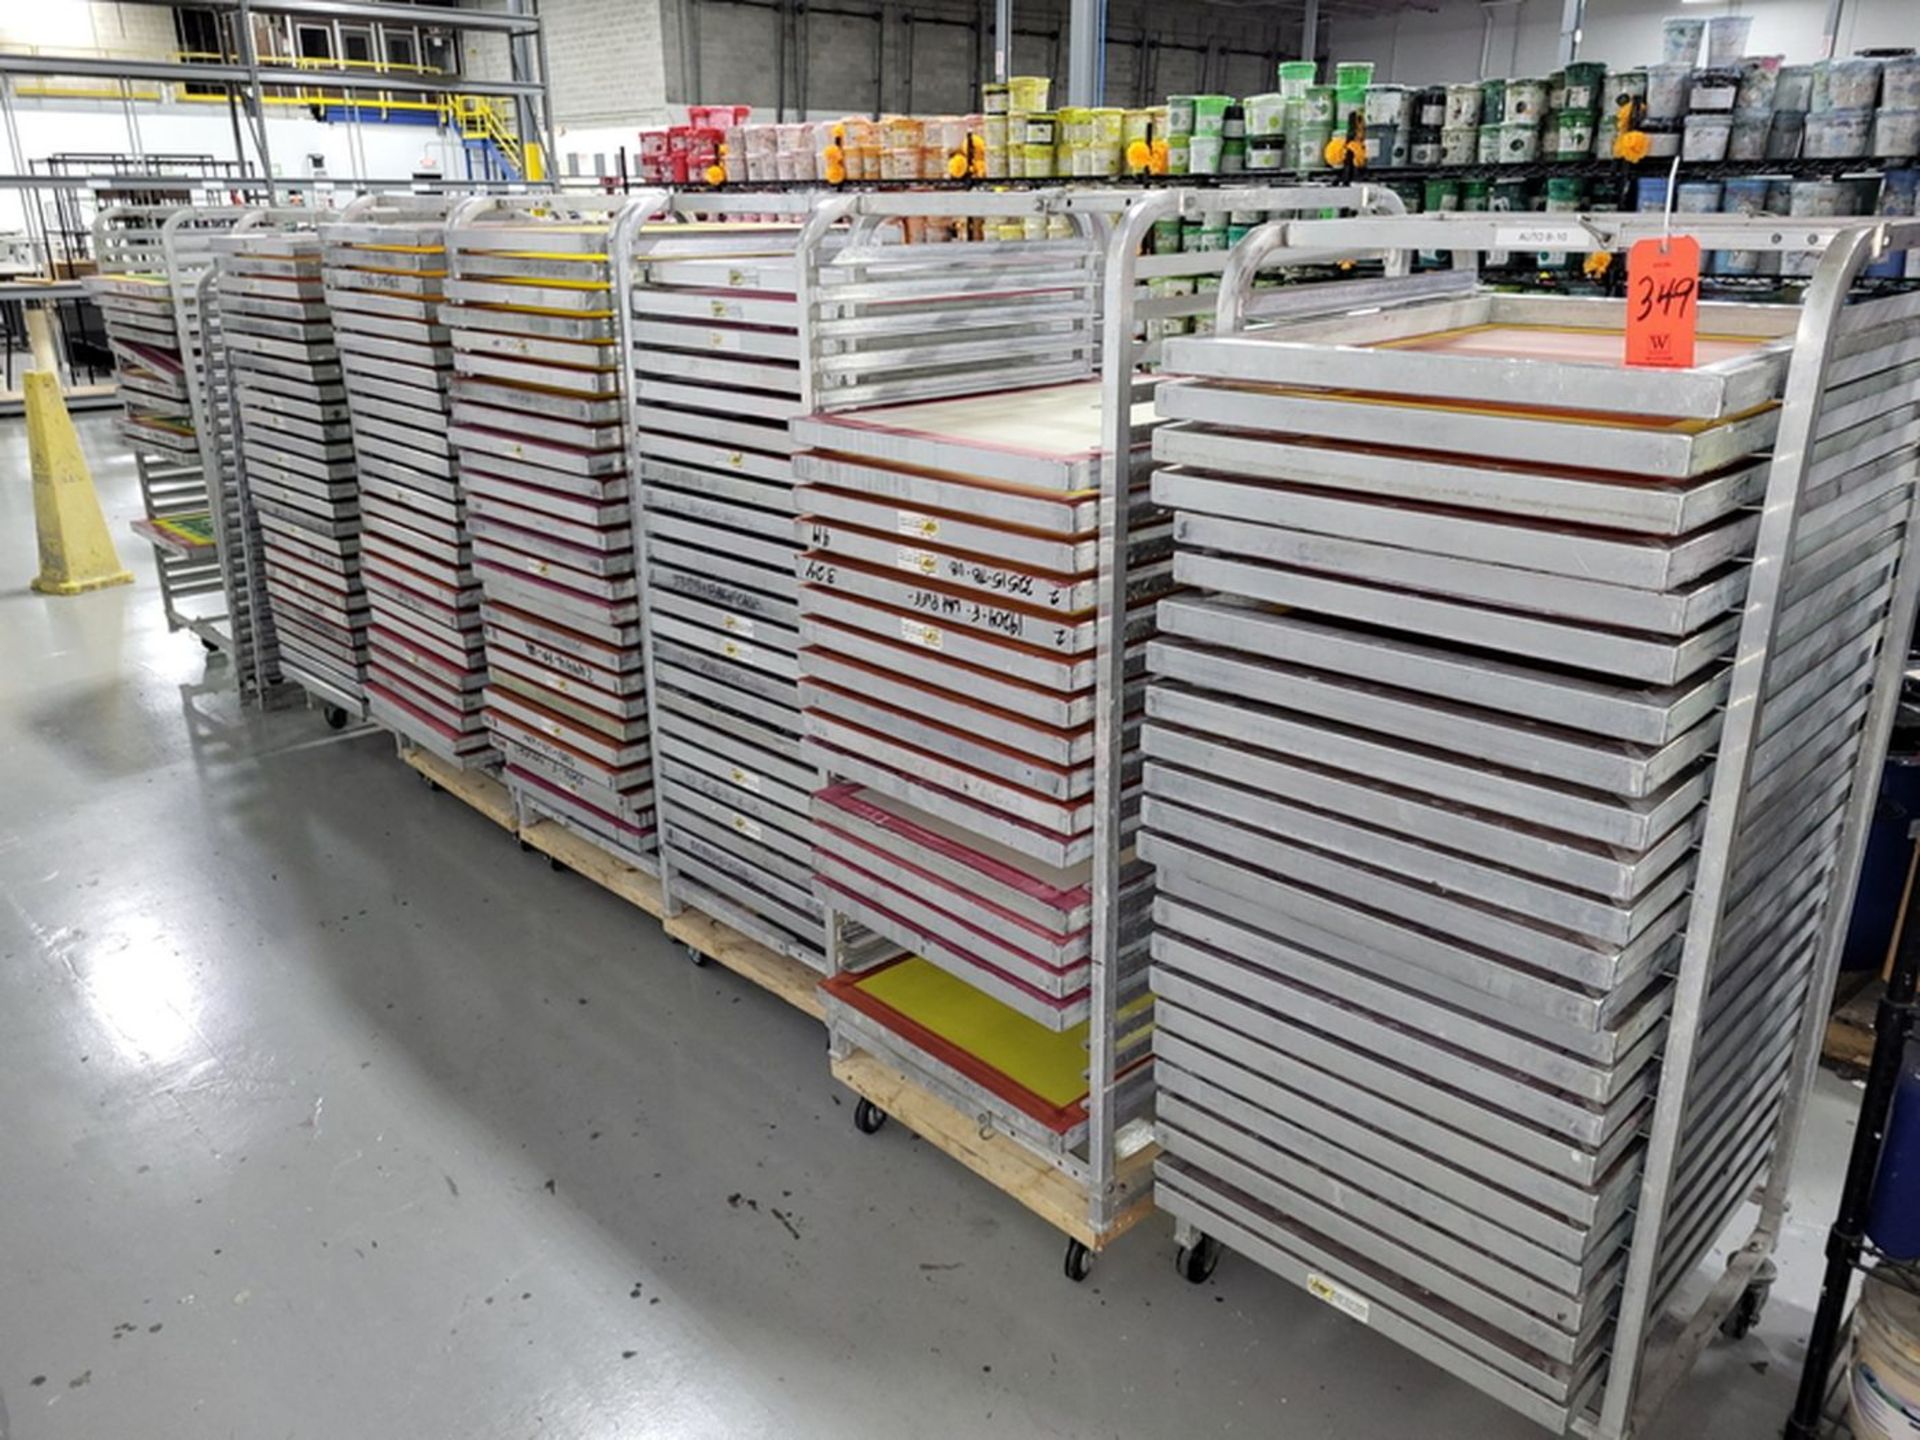 Lot - (7) GSF Portable Aluminum Screen Carts & Contents; for 23 in. x 31 in. Frames, Includes (